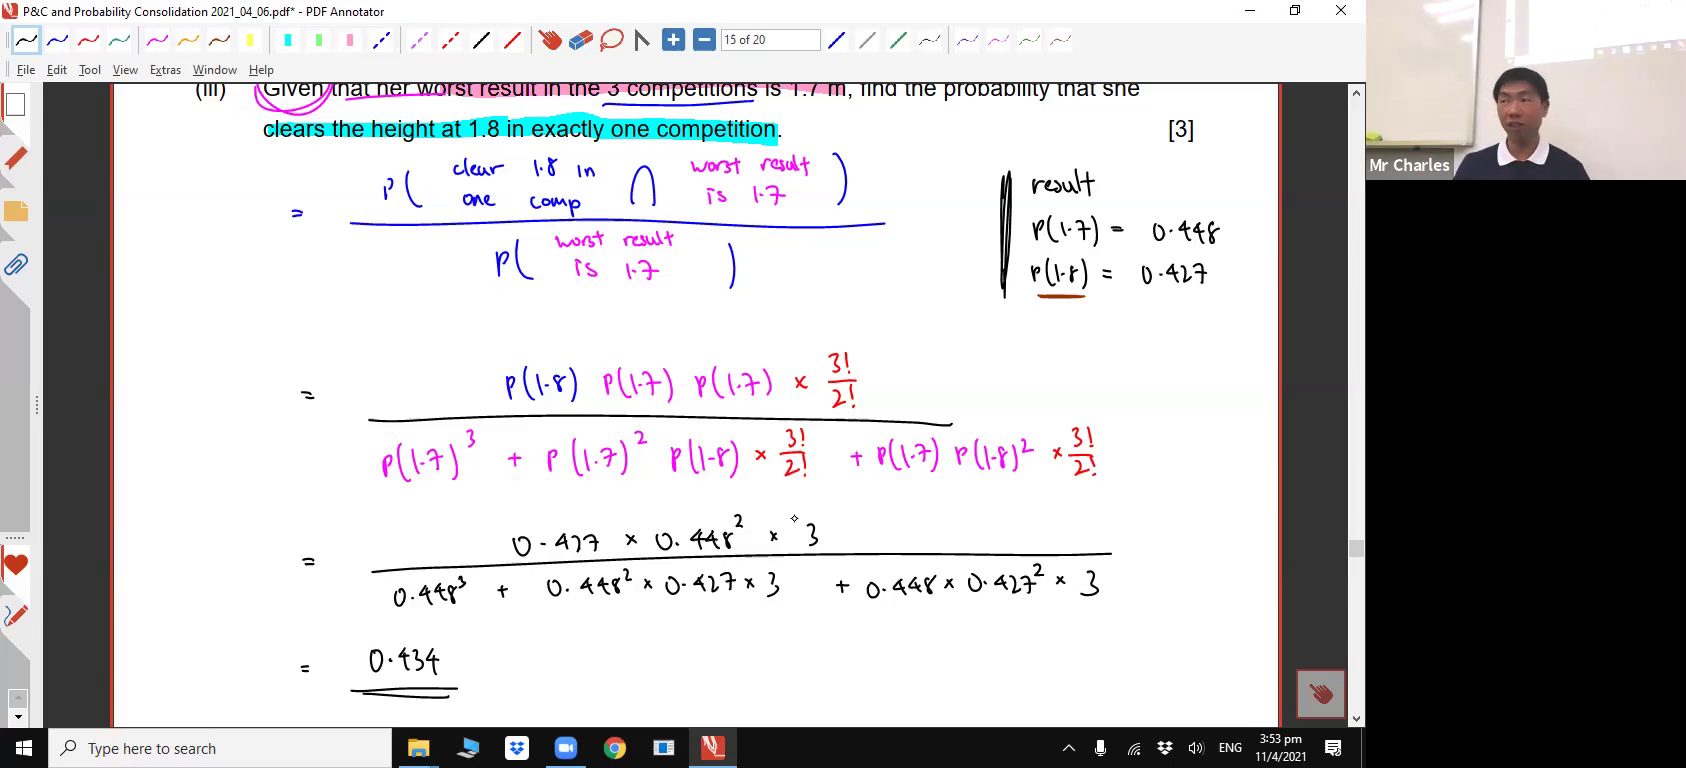 [PROBABILITY REVISION] Conditional Probability